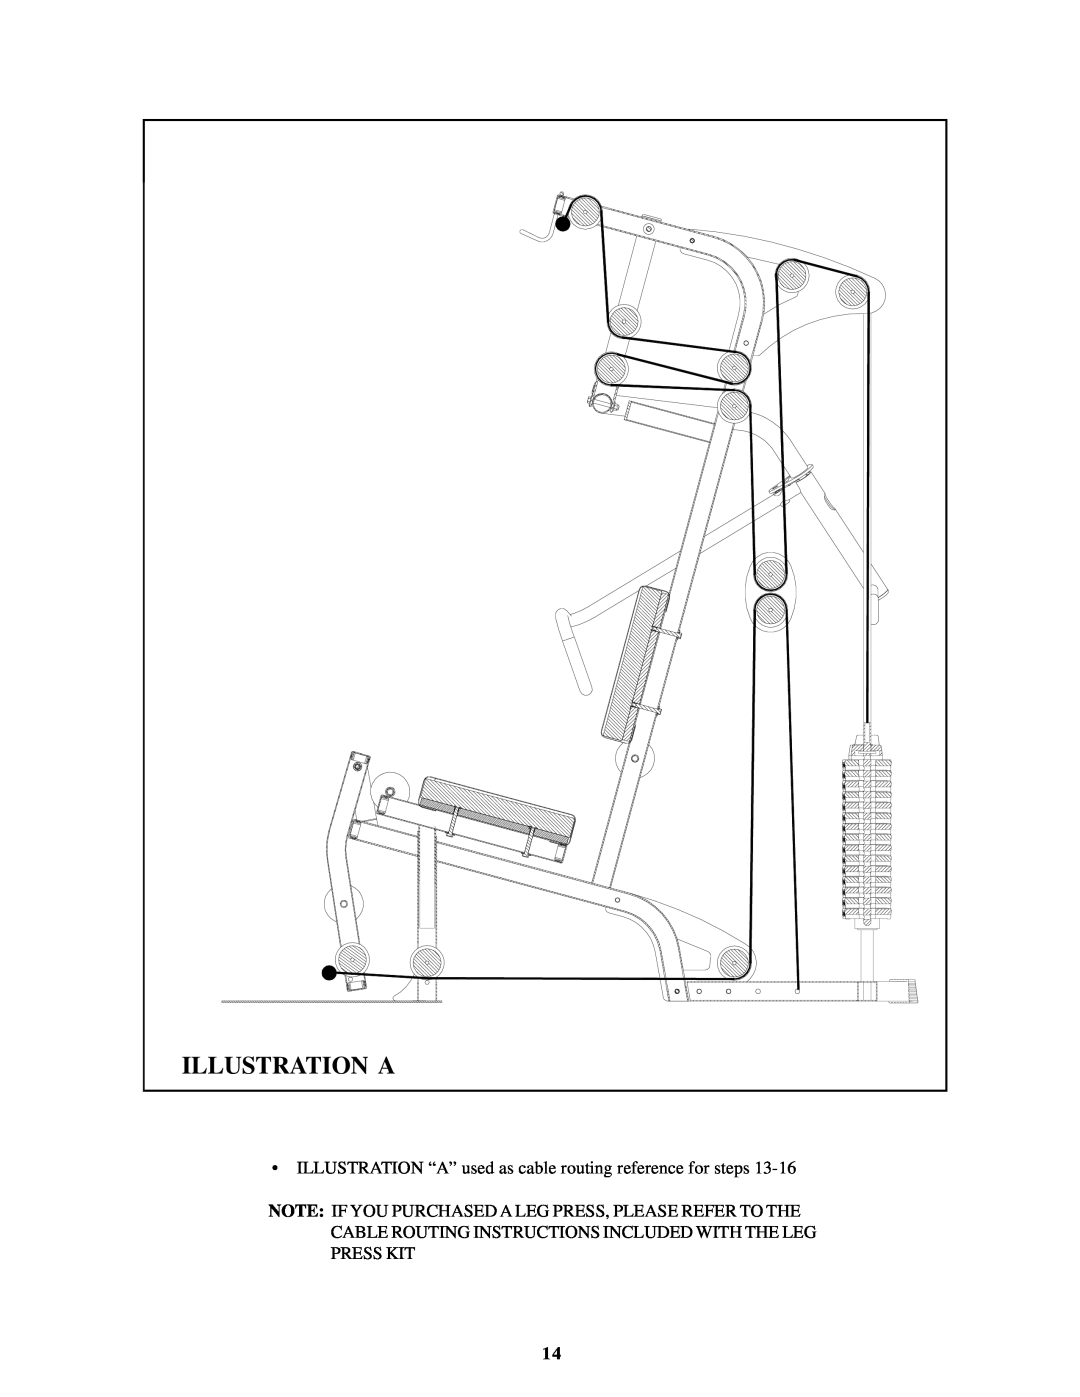 ParaBody 220 manual Illustration A, ILLUSTRATION “A” used as cable routing reference for steps 